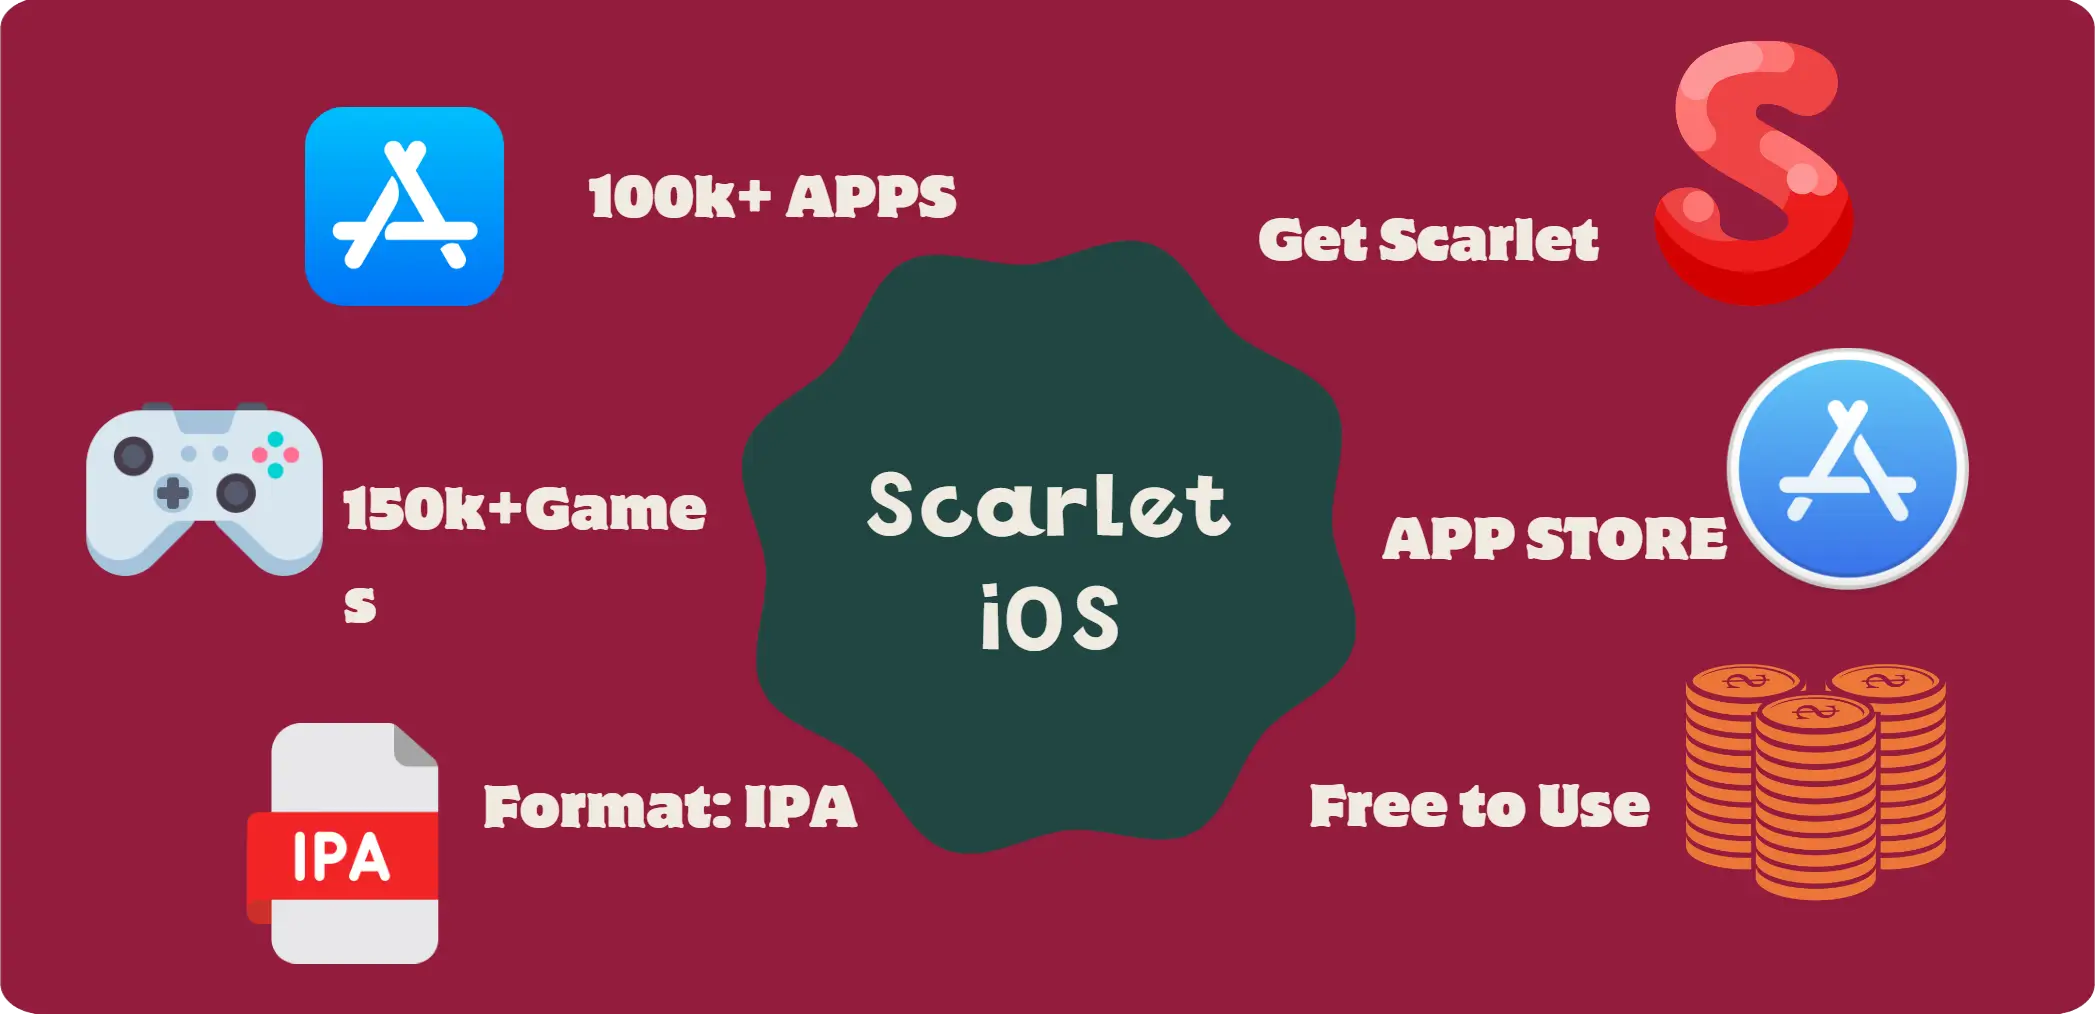 Scarlet infographic